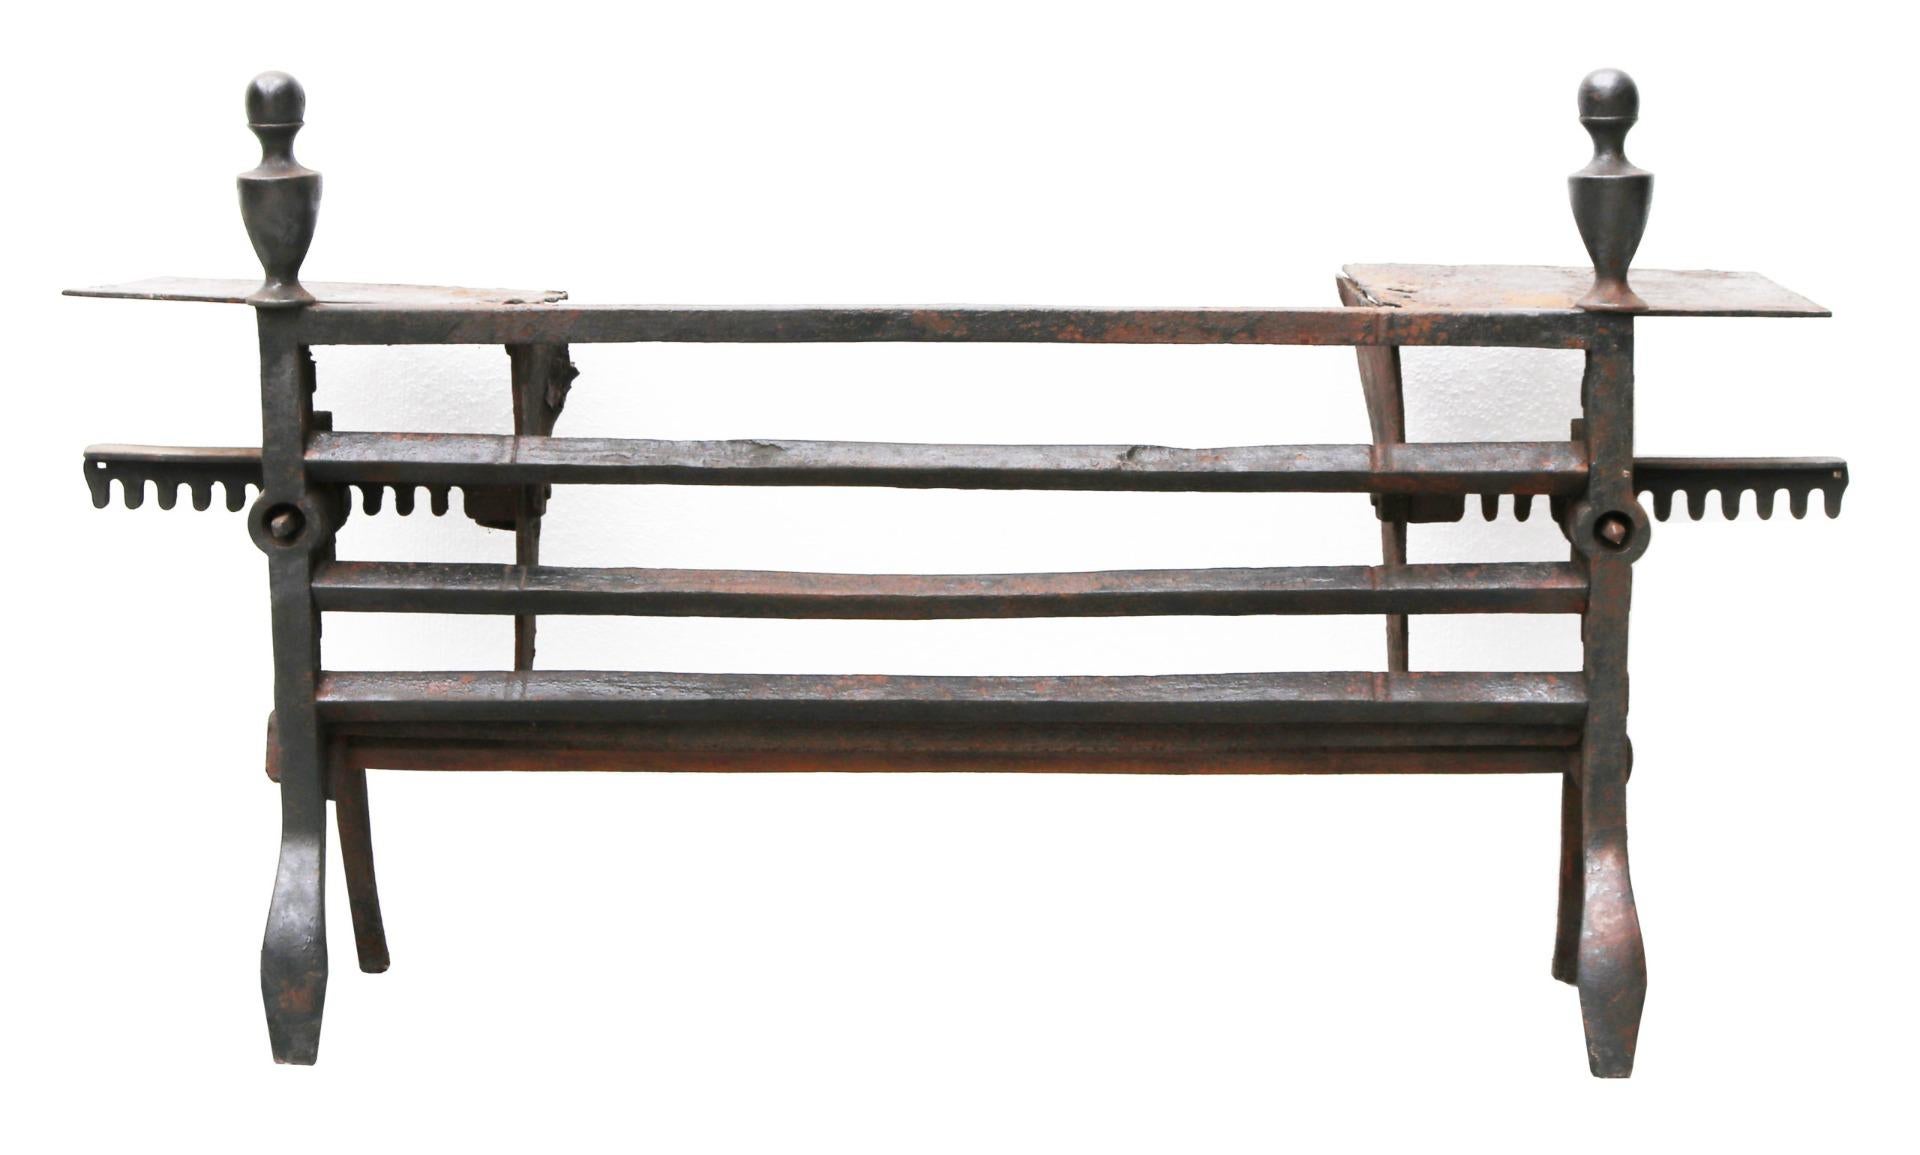 An English Late Georgian period adjustable fire grate.

Additional Dimensions:

The width is adjustable between 84 and 134 cm.